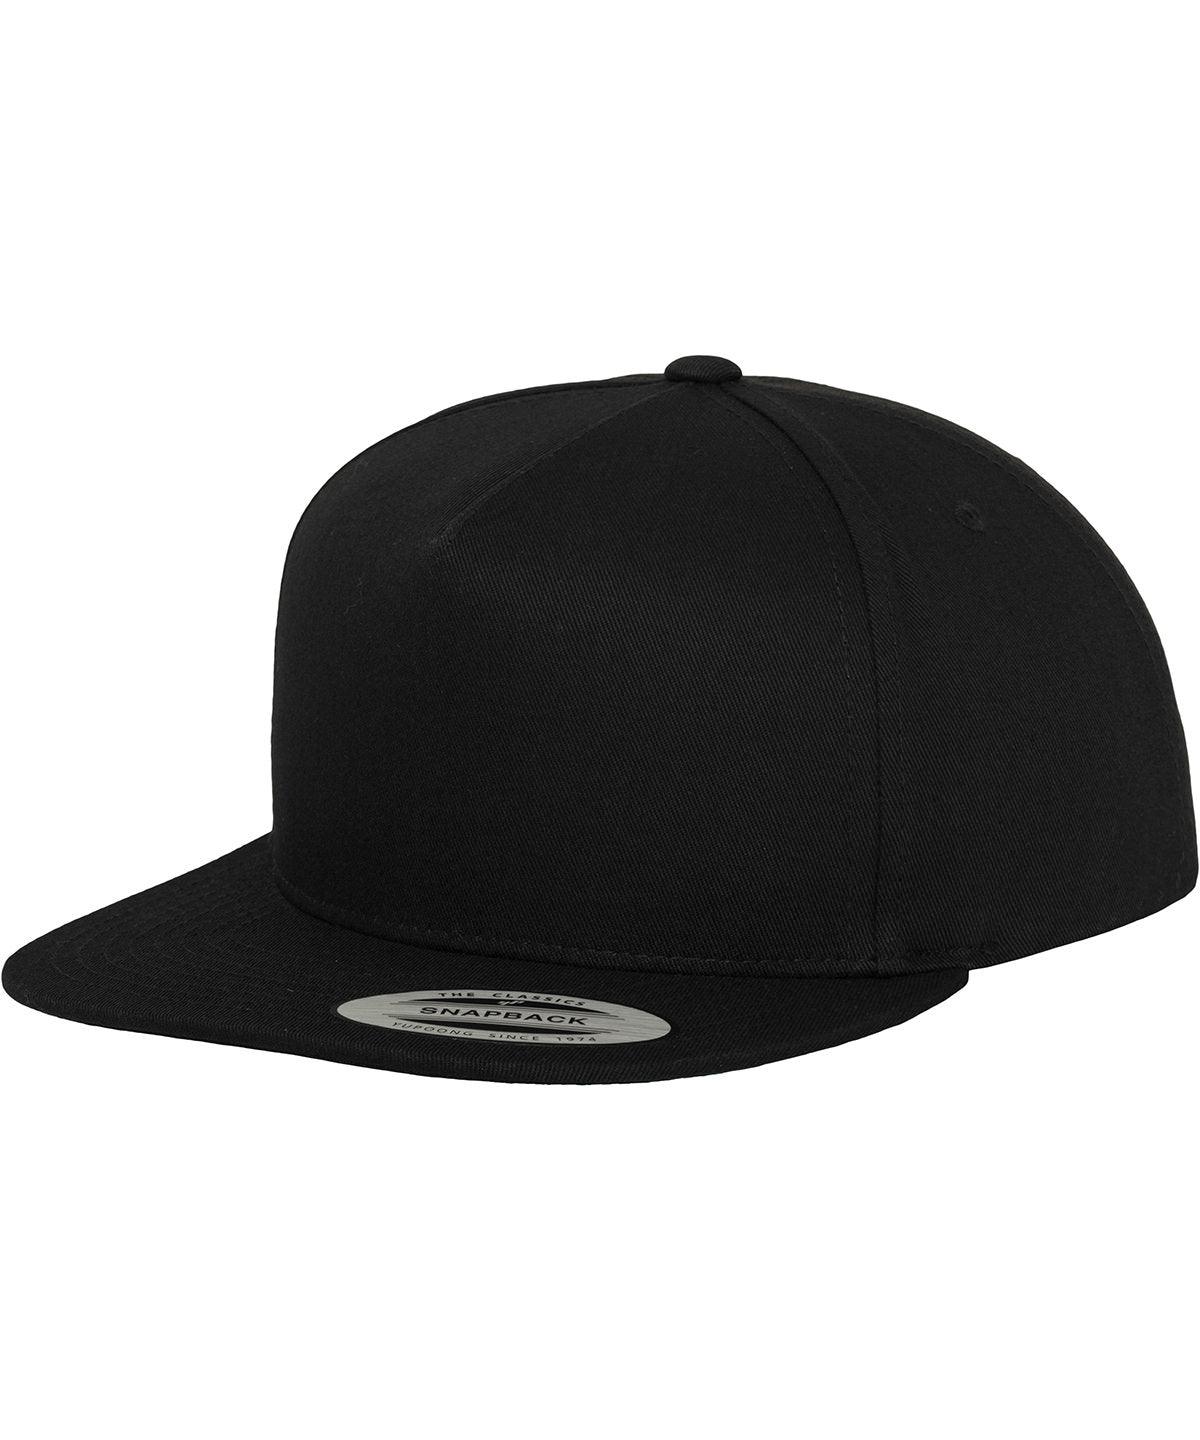 Black/Black - Classic 5-panel snapback (6007) Caps Flexfit by Yupoong Headwear, New Colours for 2023, Rebrandable Schoolwear Centres